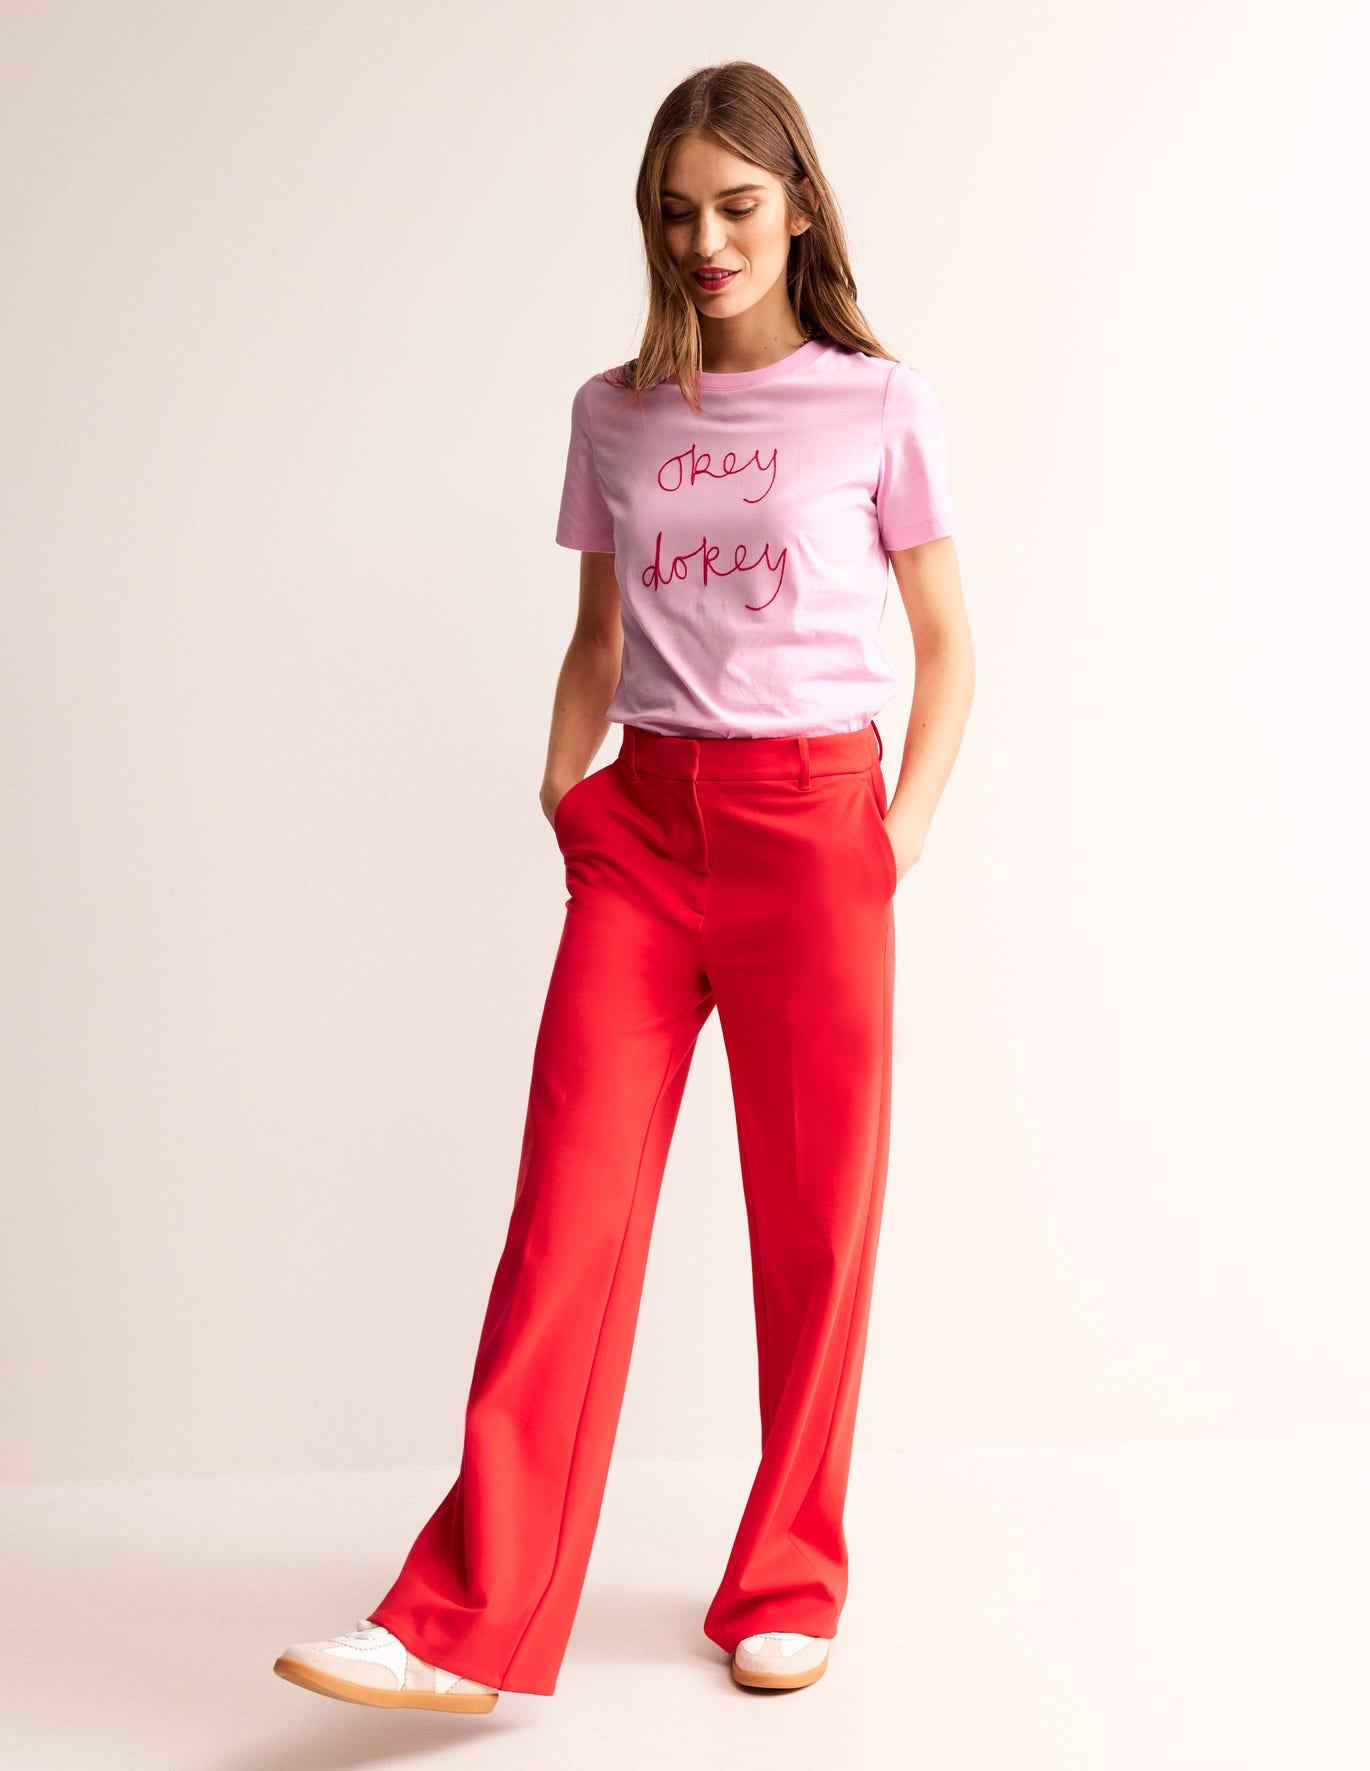 Rosa embroidered T-Shirt